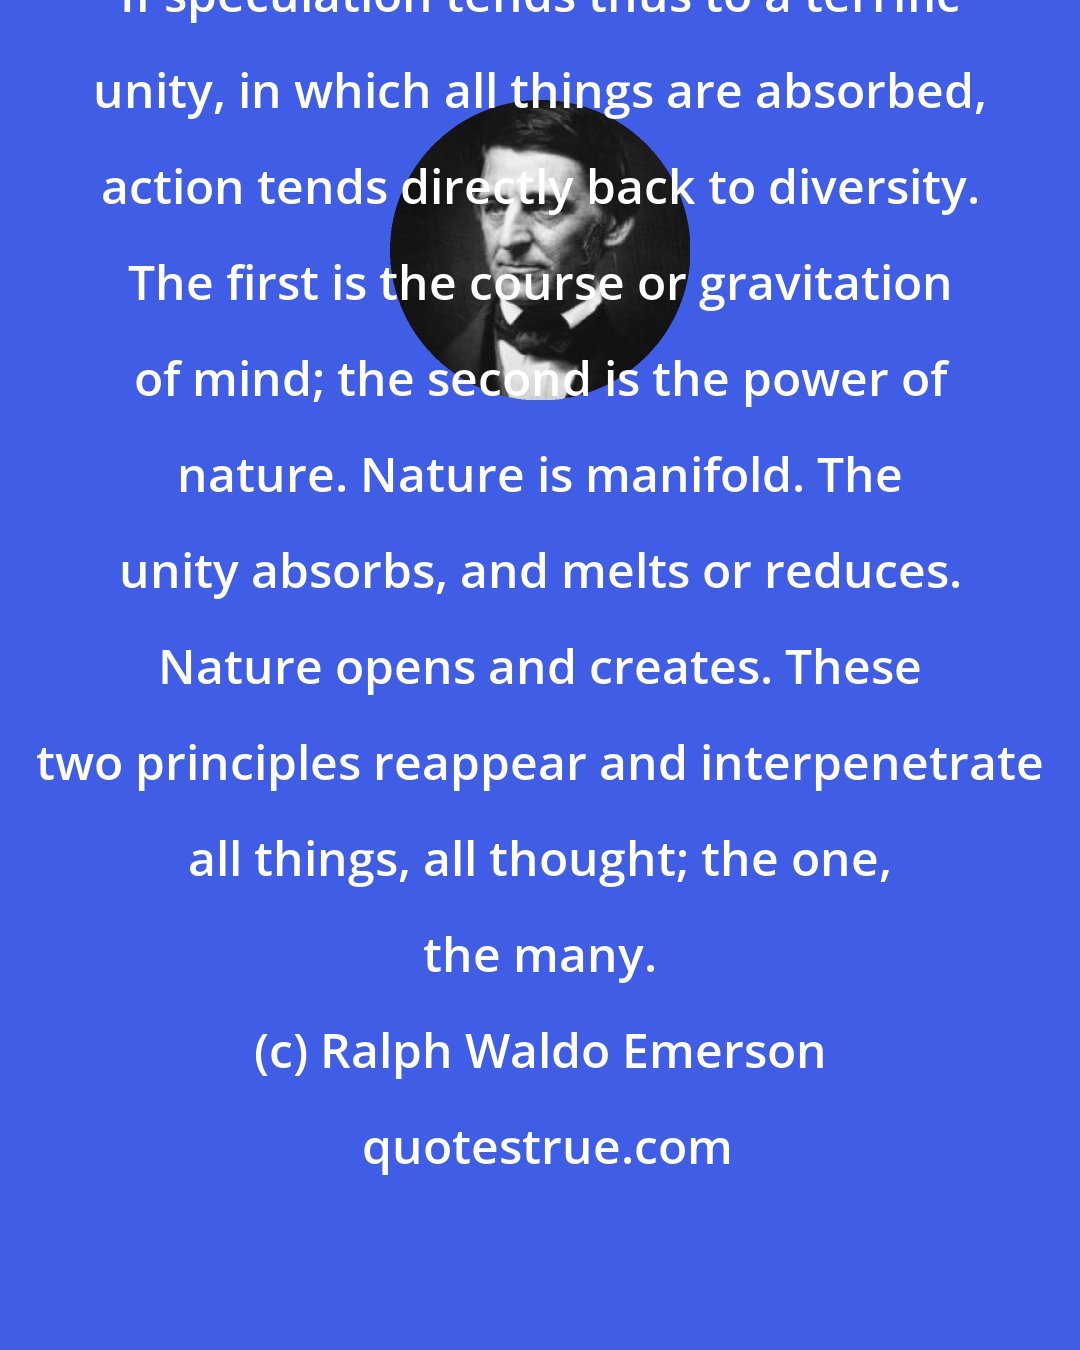 Ralph Waldo Emerson: If speculation tends thus to a terrific unity, in which all things are absorbed, action tends directly back to diversity. The first is the course or gravitation of mind; the second is the power of nature. Nature is manifold. The unity absorbs, and melts or reduces. Nature opens and creates. These two principles reappear and interpenetrate all things, all thought; the one, the many.